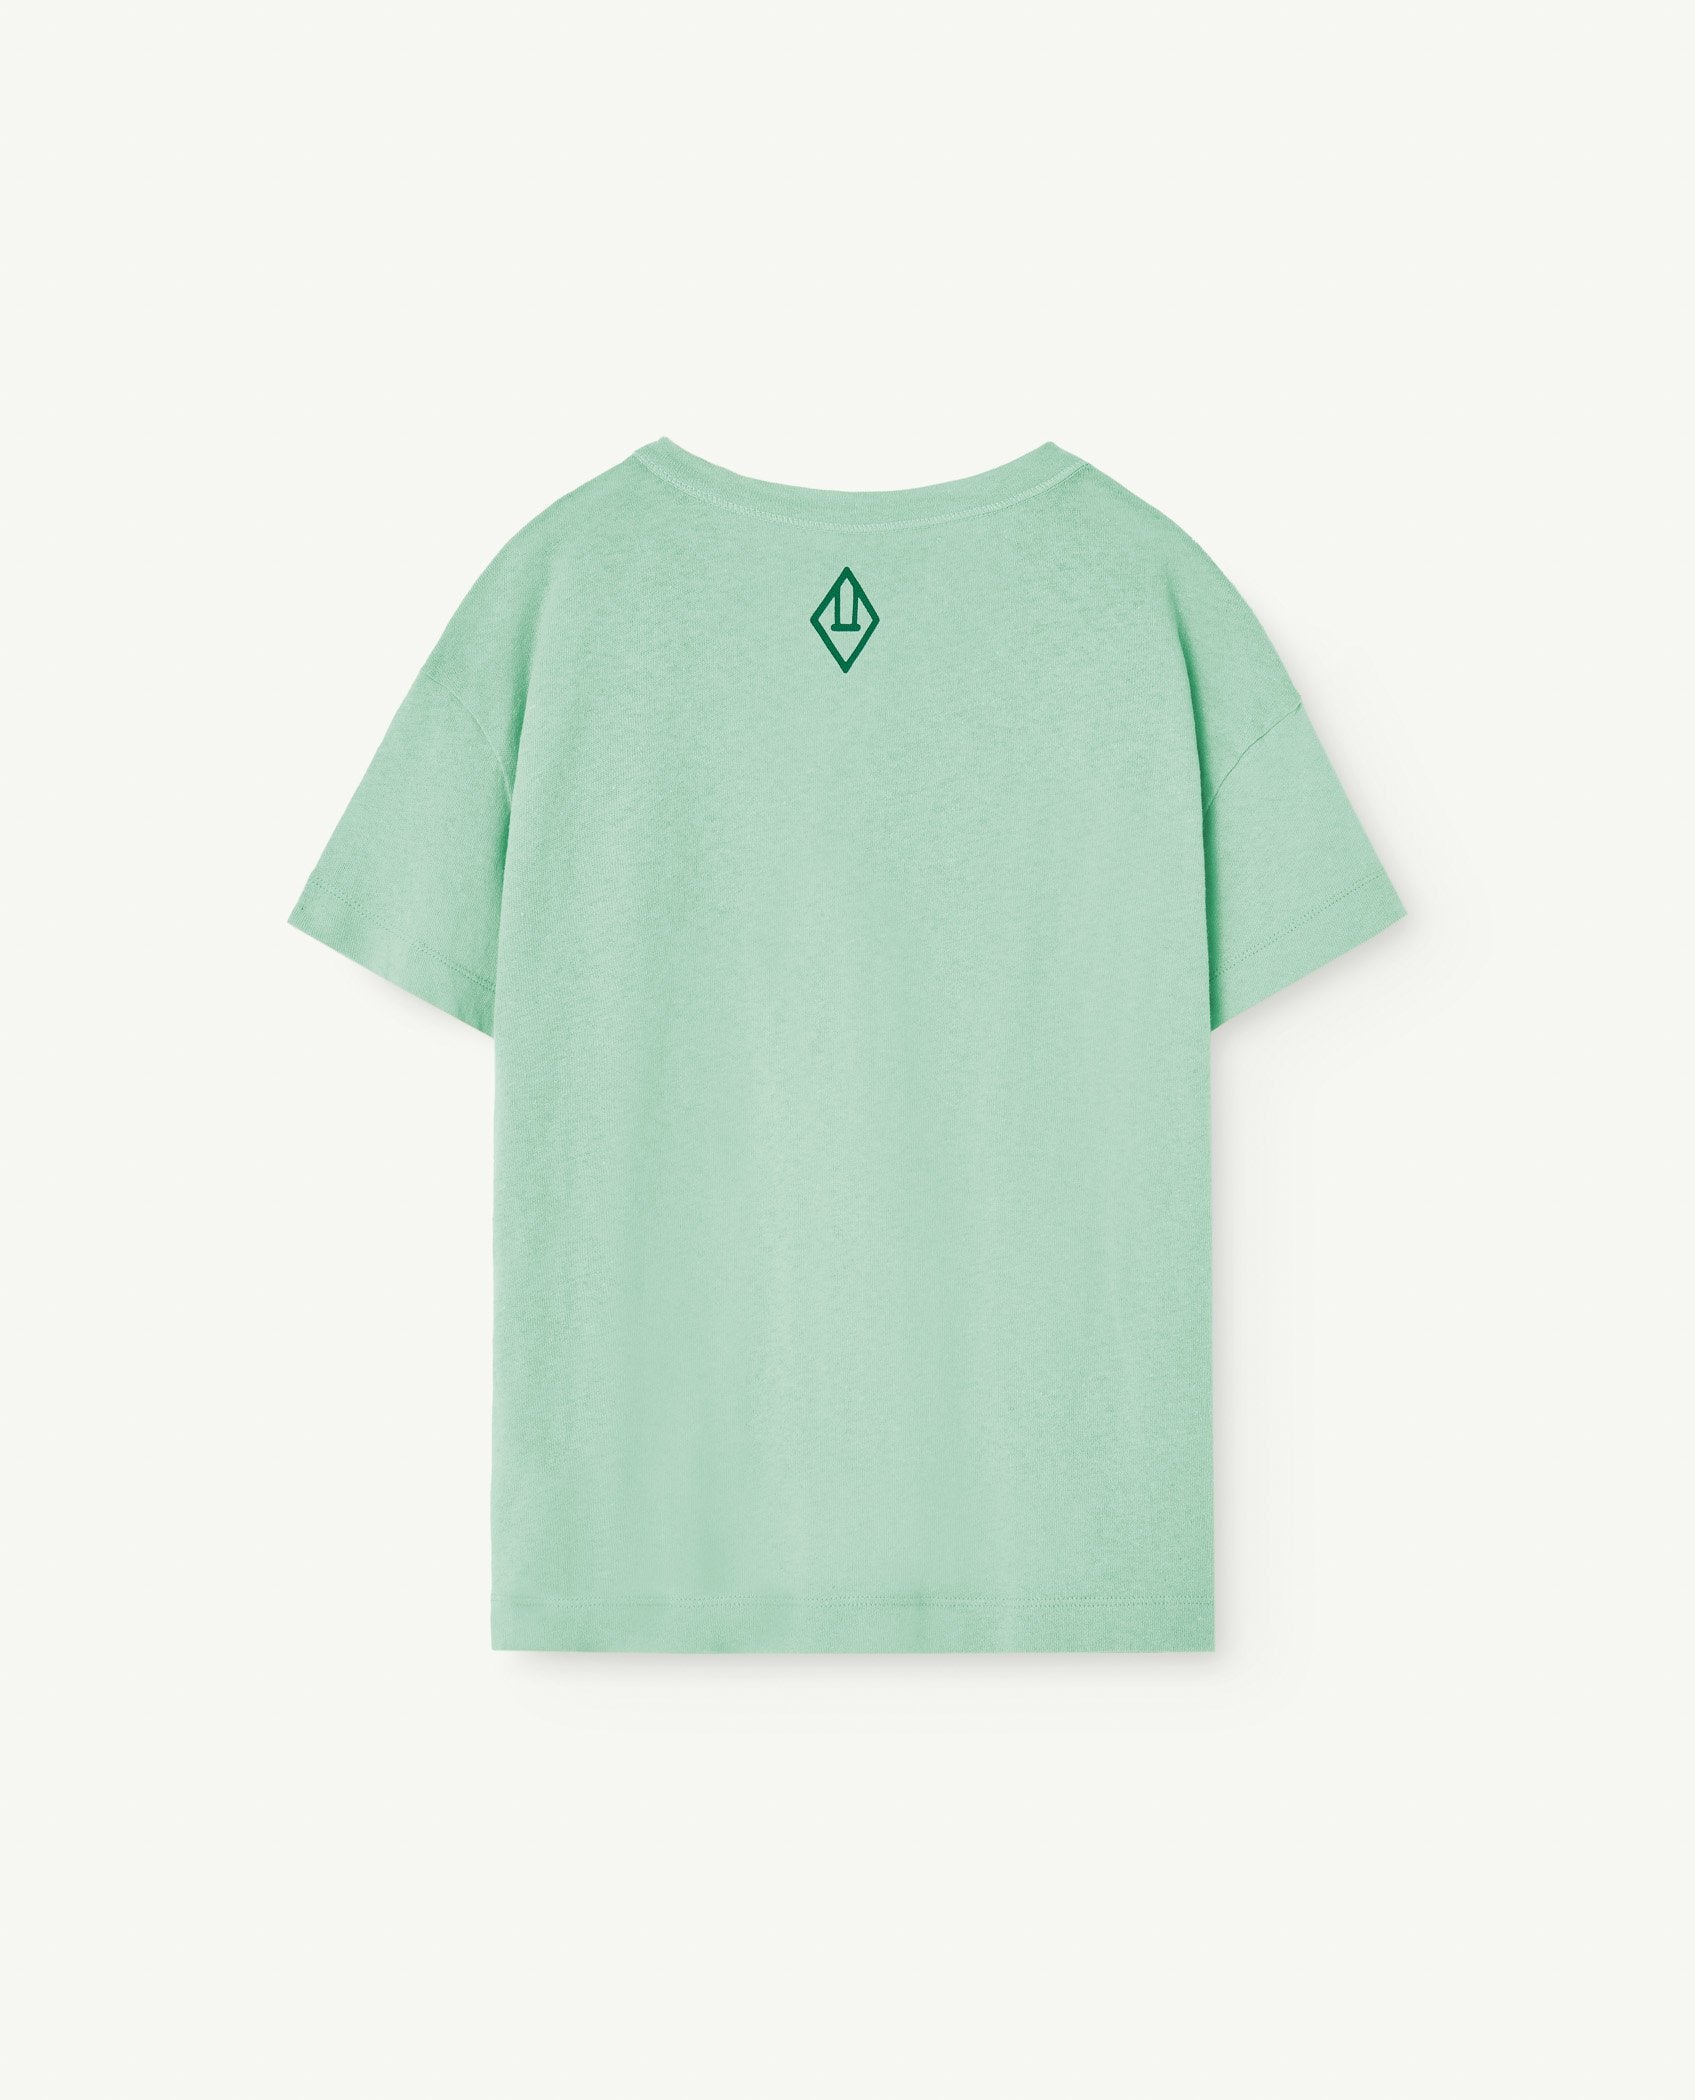 Turquoise Orion Kids T-Shirt PRODUCT BACK